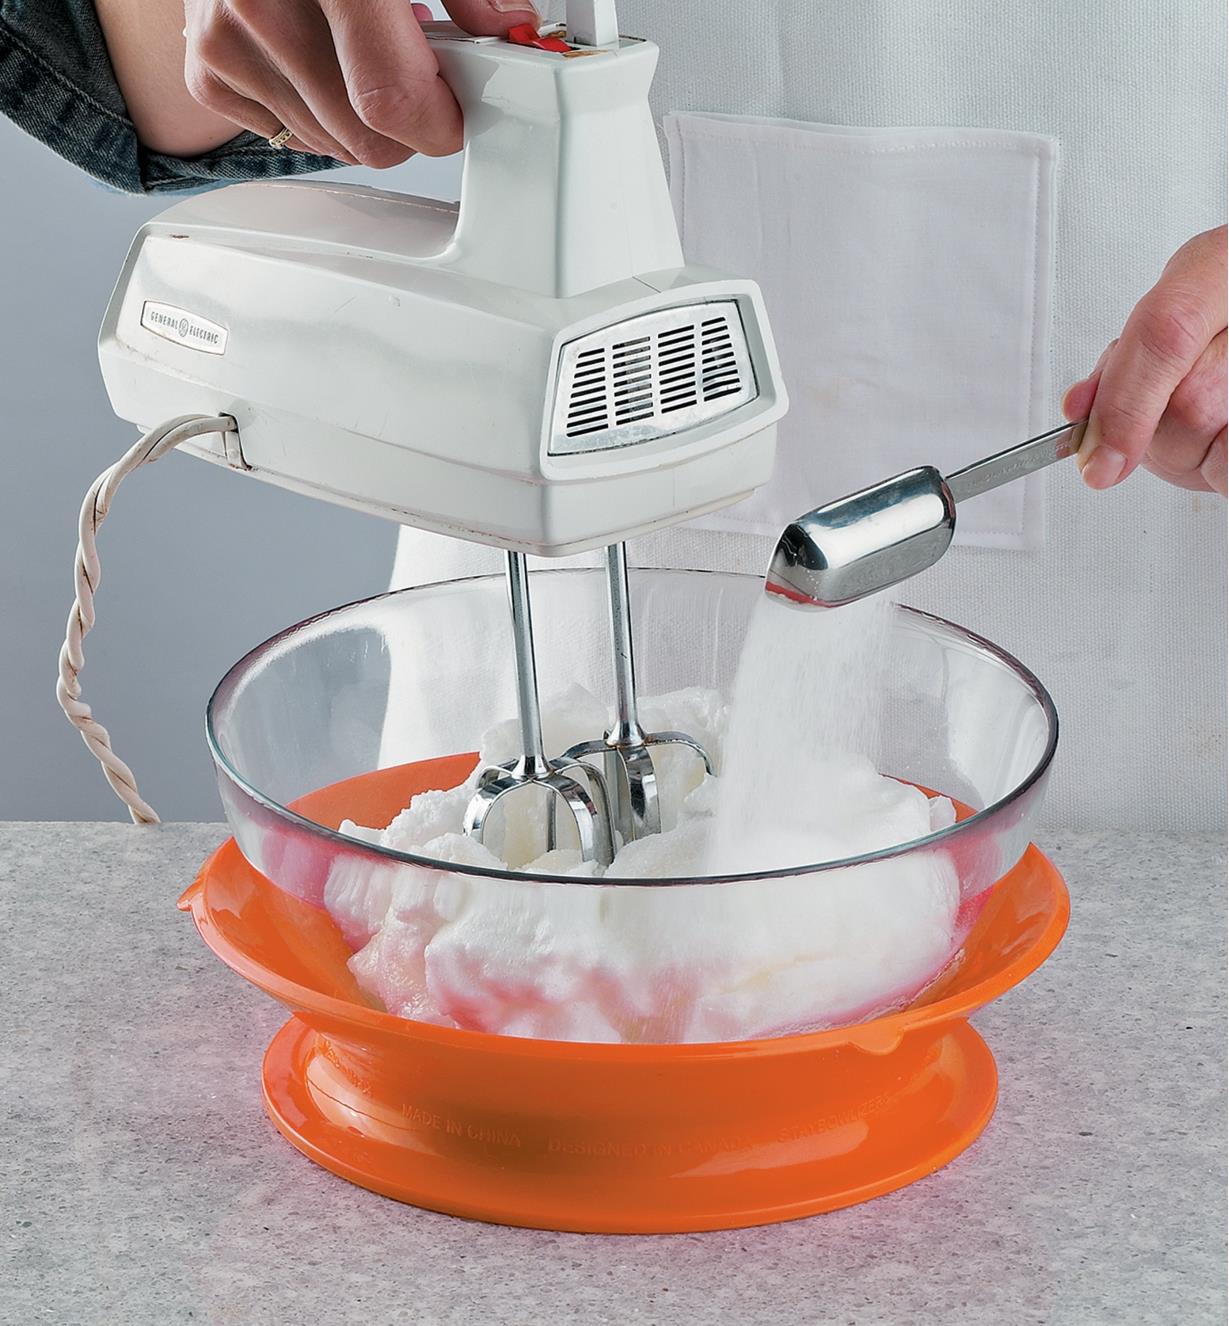 A cook whipping meringue in a glass bowl set on a Staybowlizer